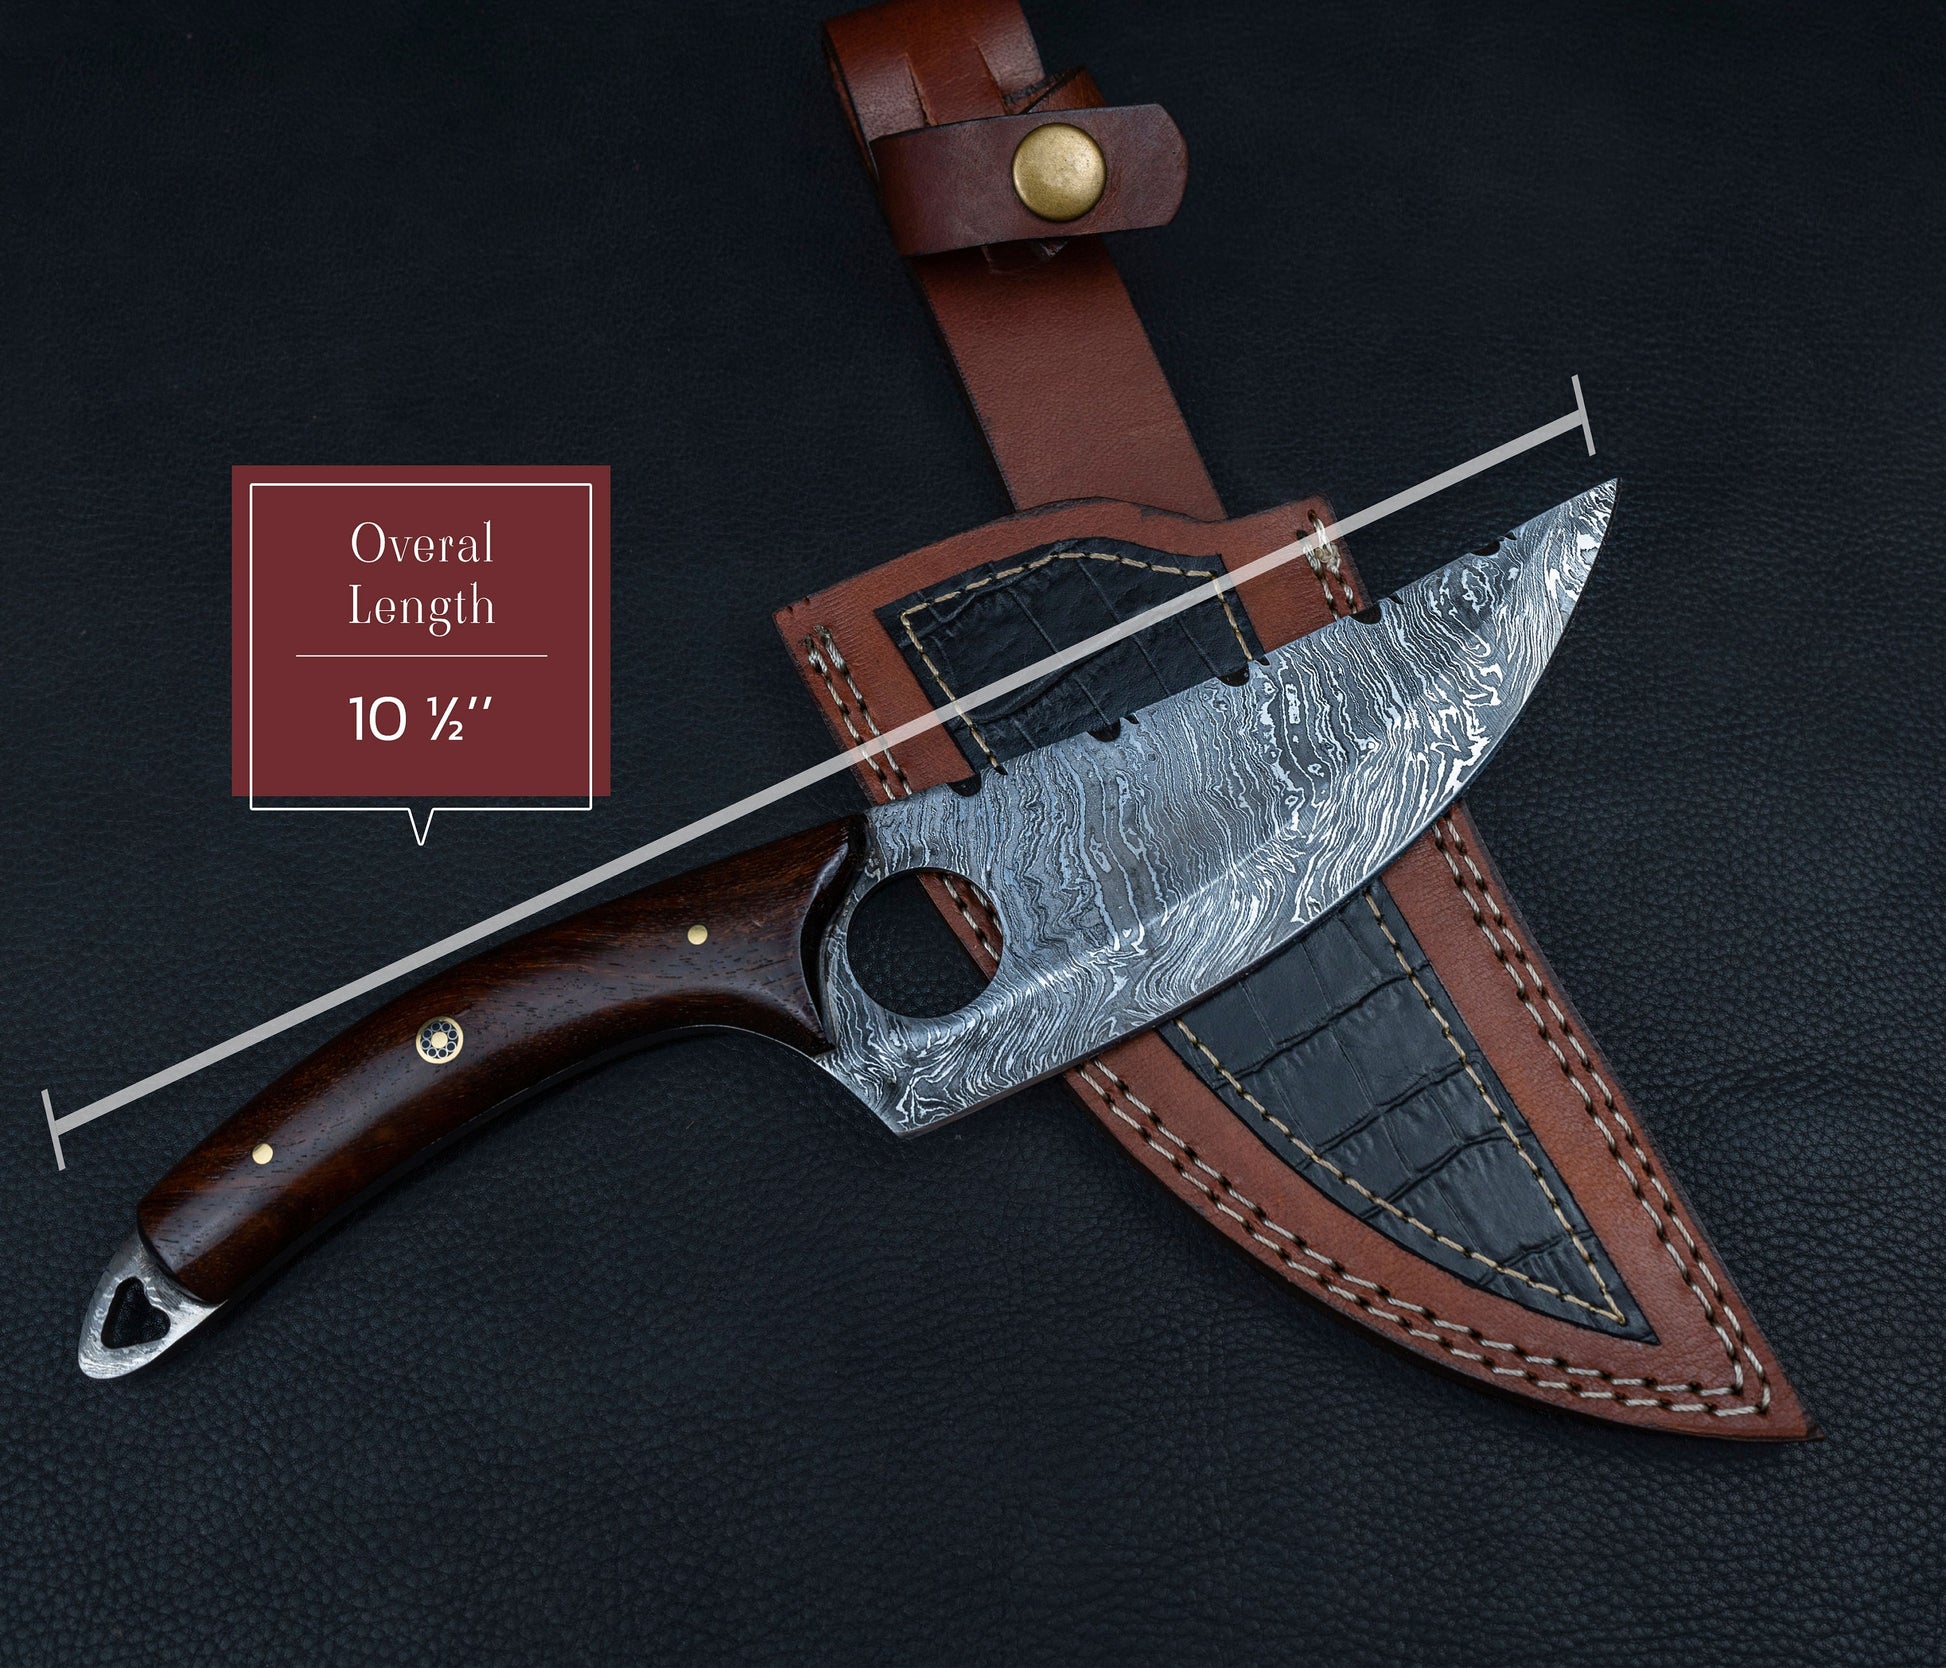 Handmade Japanese Damascus Chief knife Rose Wood Handle, Hand forged Damascus knife Non slip Walnut, Kitchen Skinner Knife, Gift for Dad